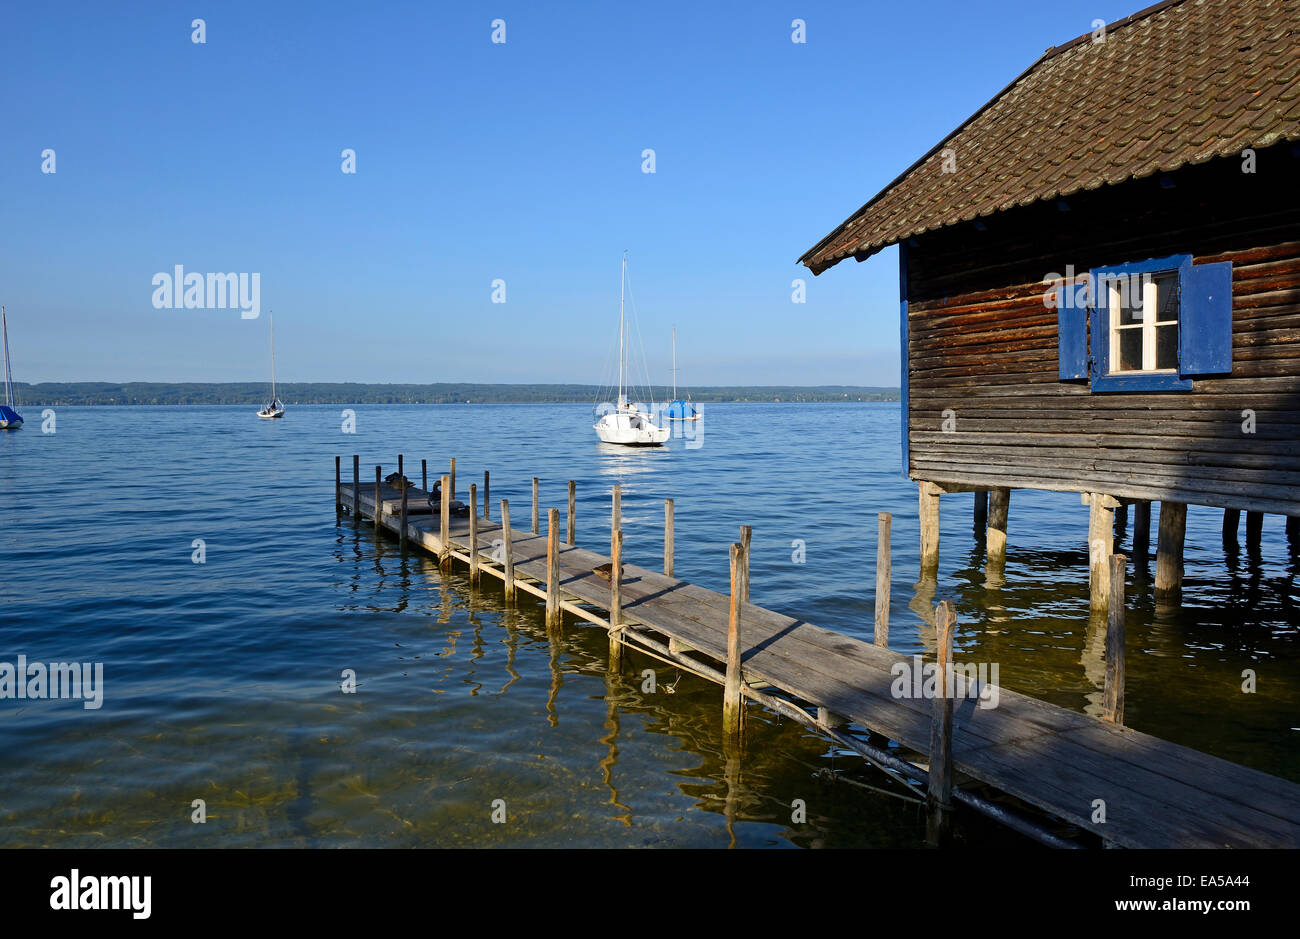 Germany, Bavaria, Upper Bavaria, near Herrsching, Ammersee lake, boathouse and wooden jetty Stock Photo